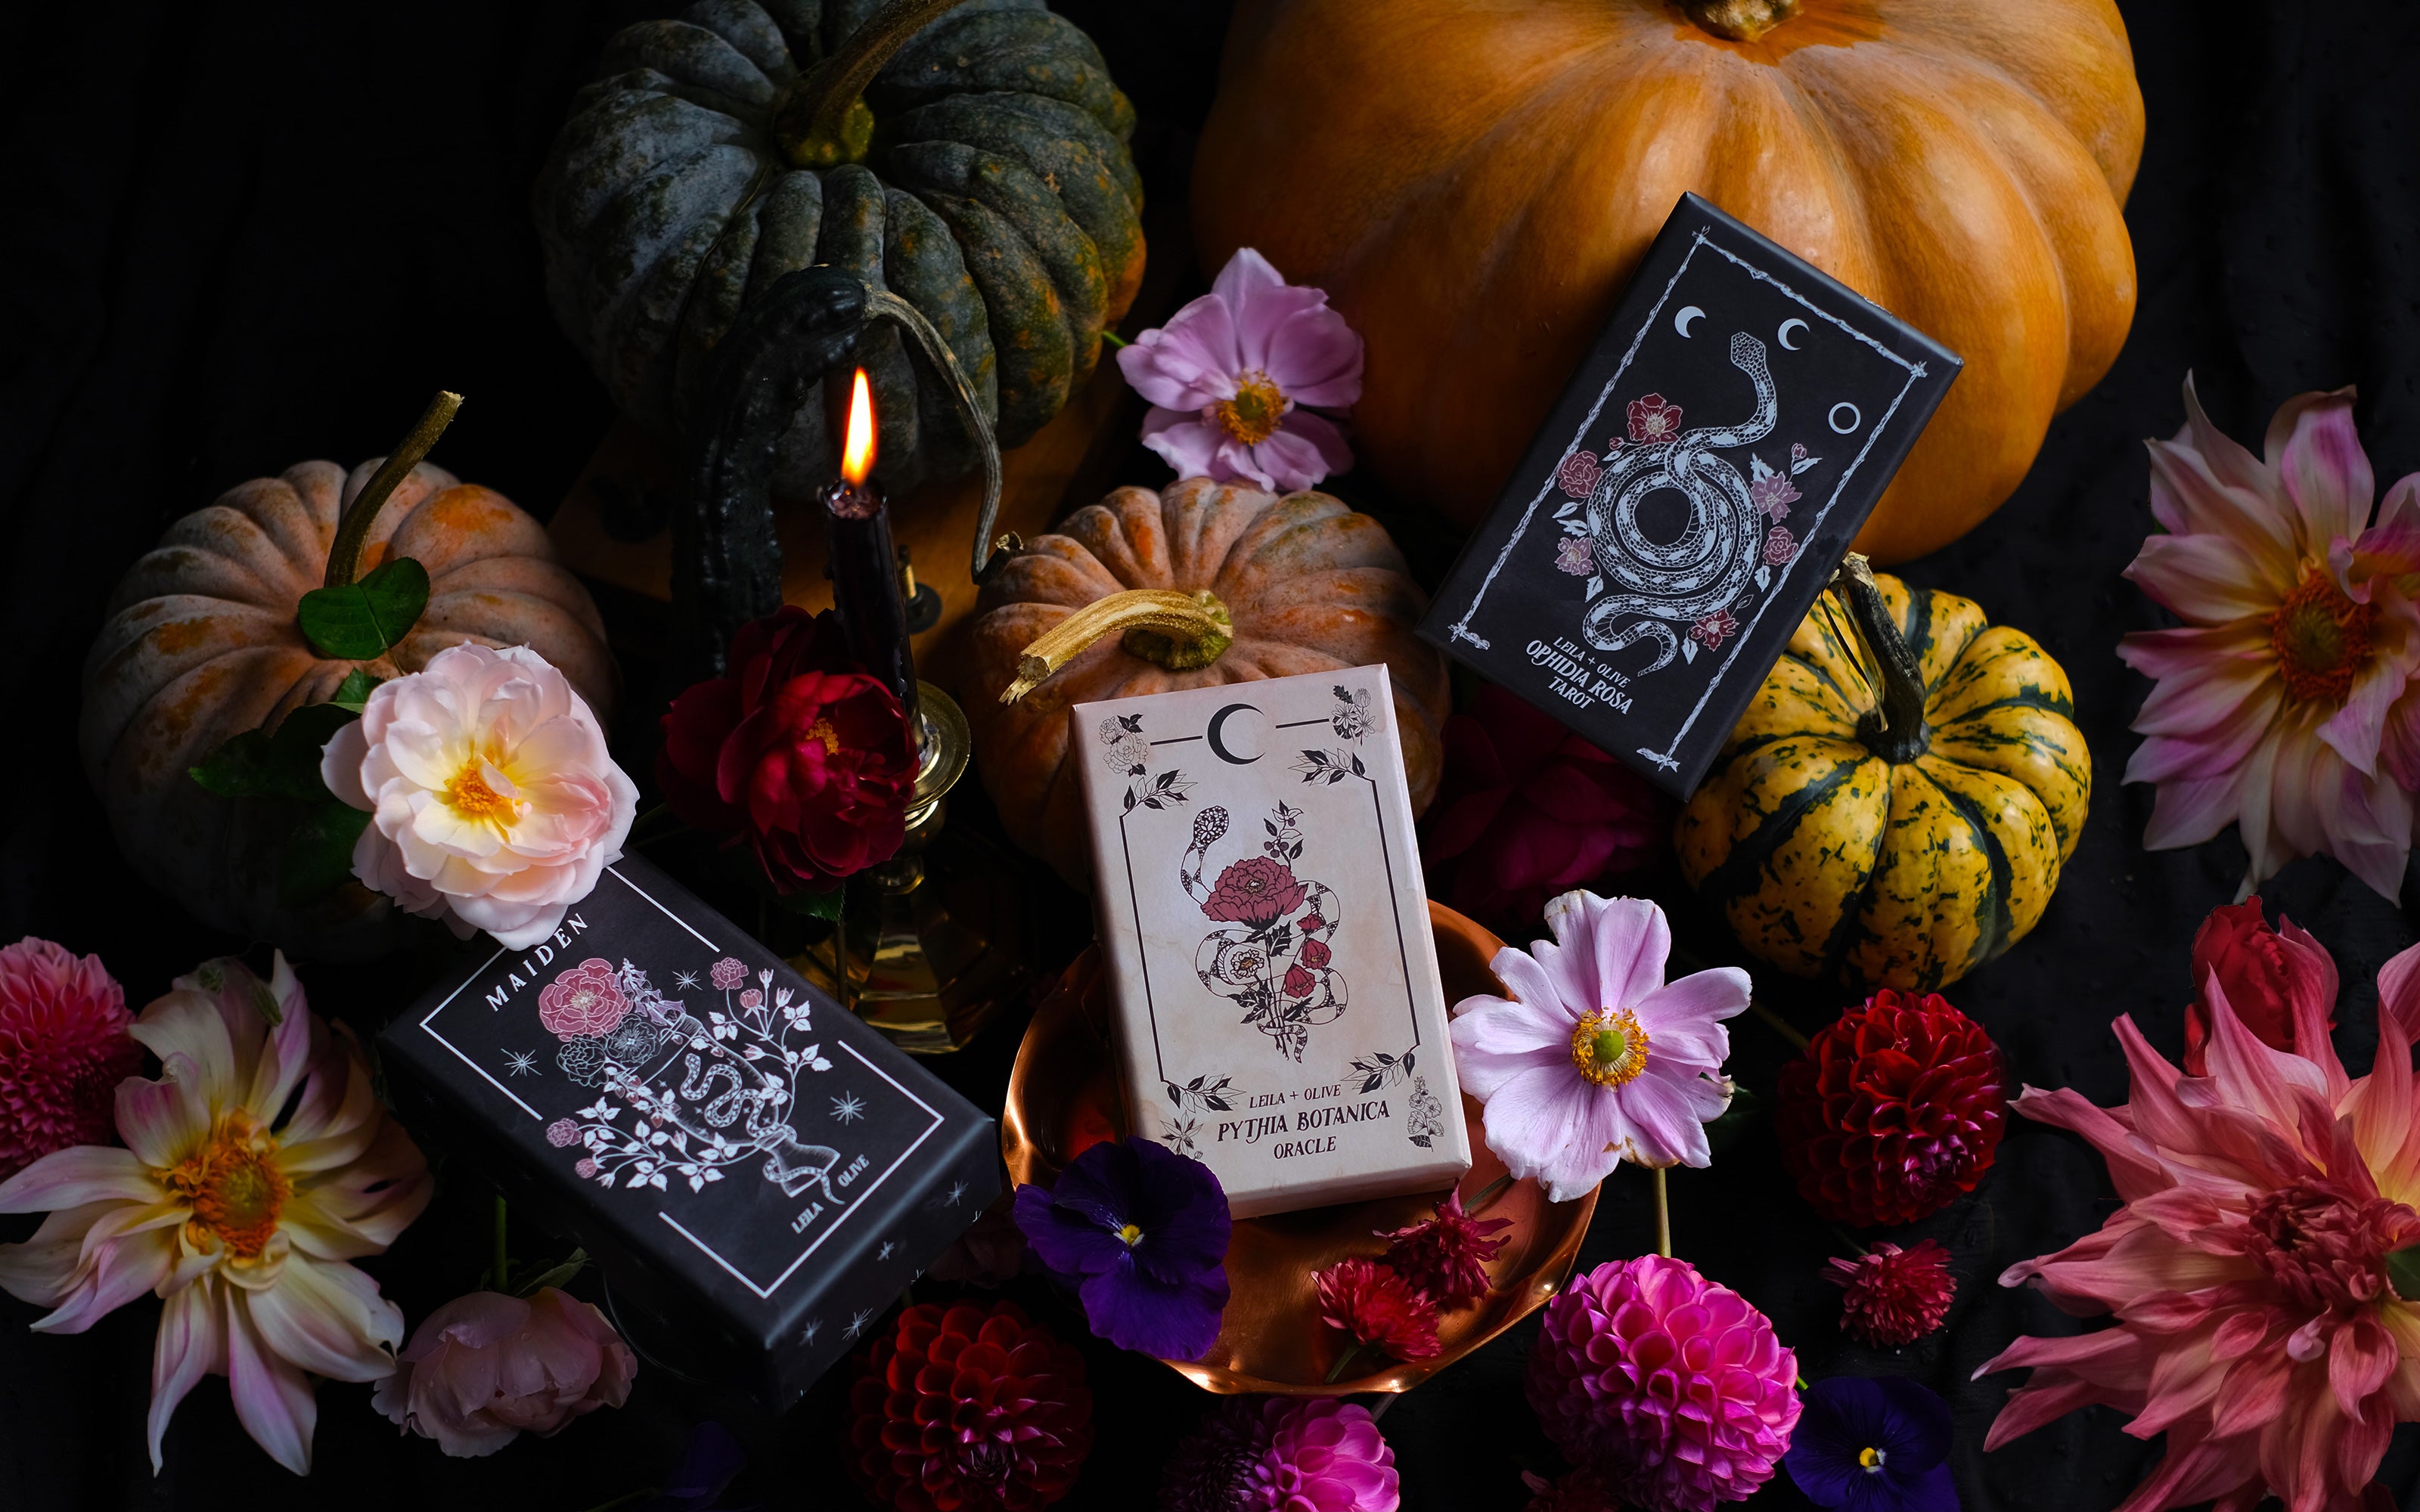 Botanical Tarot and Botanical Oracle card decks, illustrated and painted by hand. Each of these botanical and flora inspired, intuitive tarot decks delves into the garden and the natural world while remaining rooted in mythology and tradition.